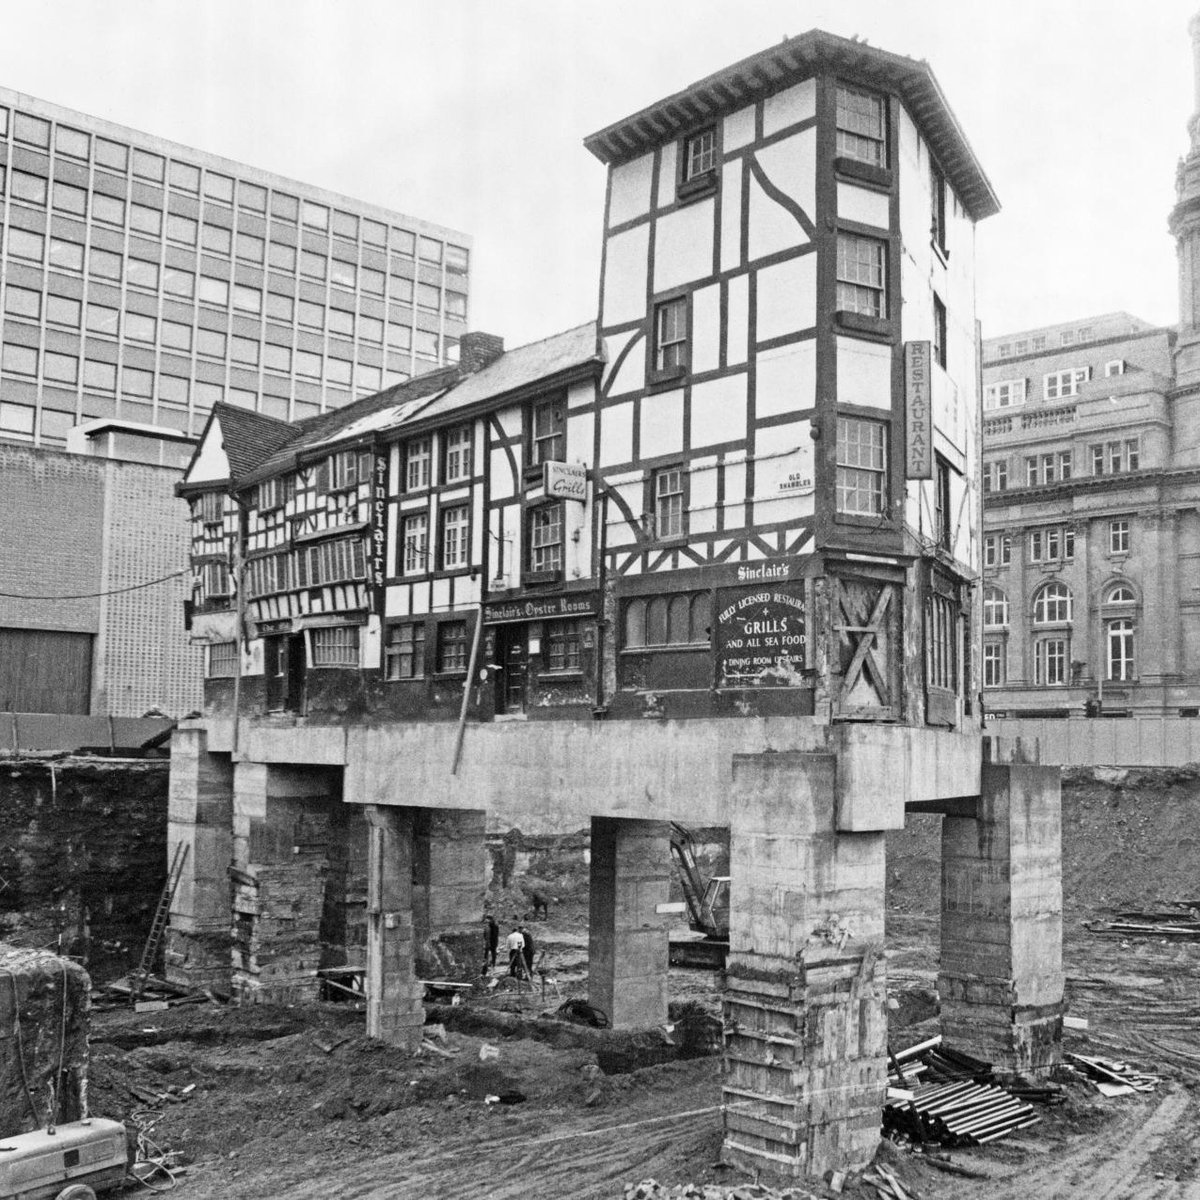 The Old Wellington Inn and Sinclair’s Oyster Room in Manchester were once a house, built around the mid-16th century. This photograph was taken in 1971 when the building was underpinned and raised to fit the new street level. It was later moved as Shambles Square was developed.